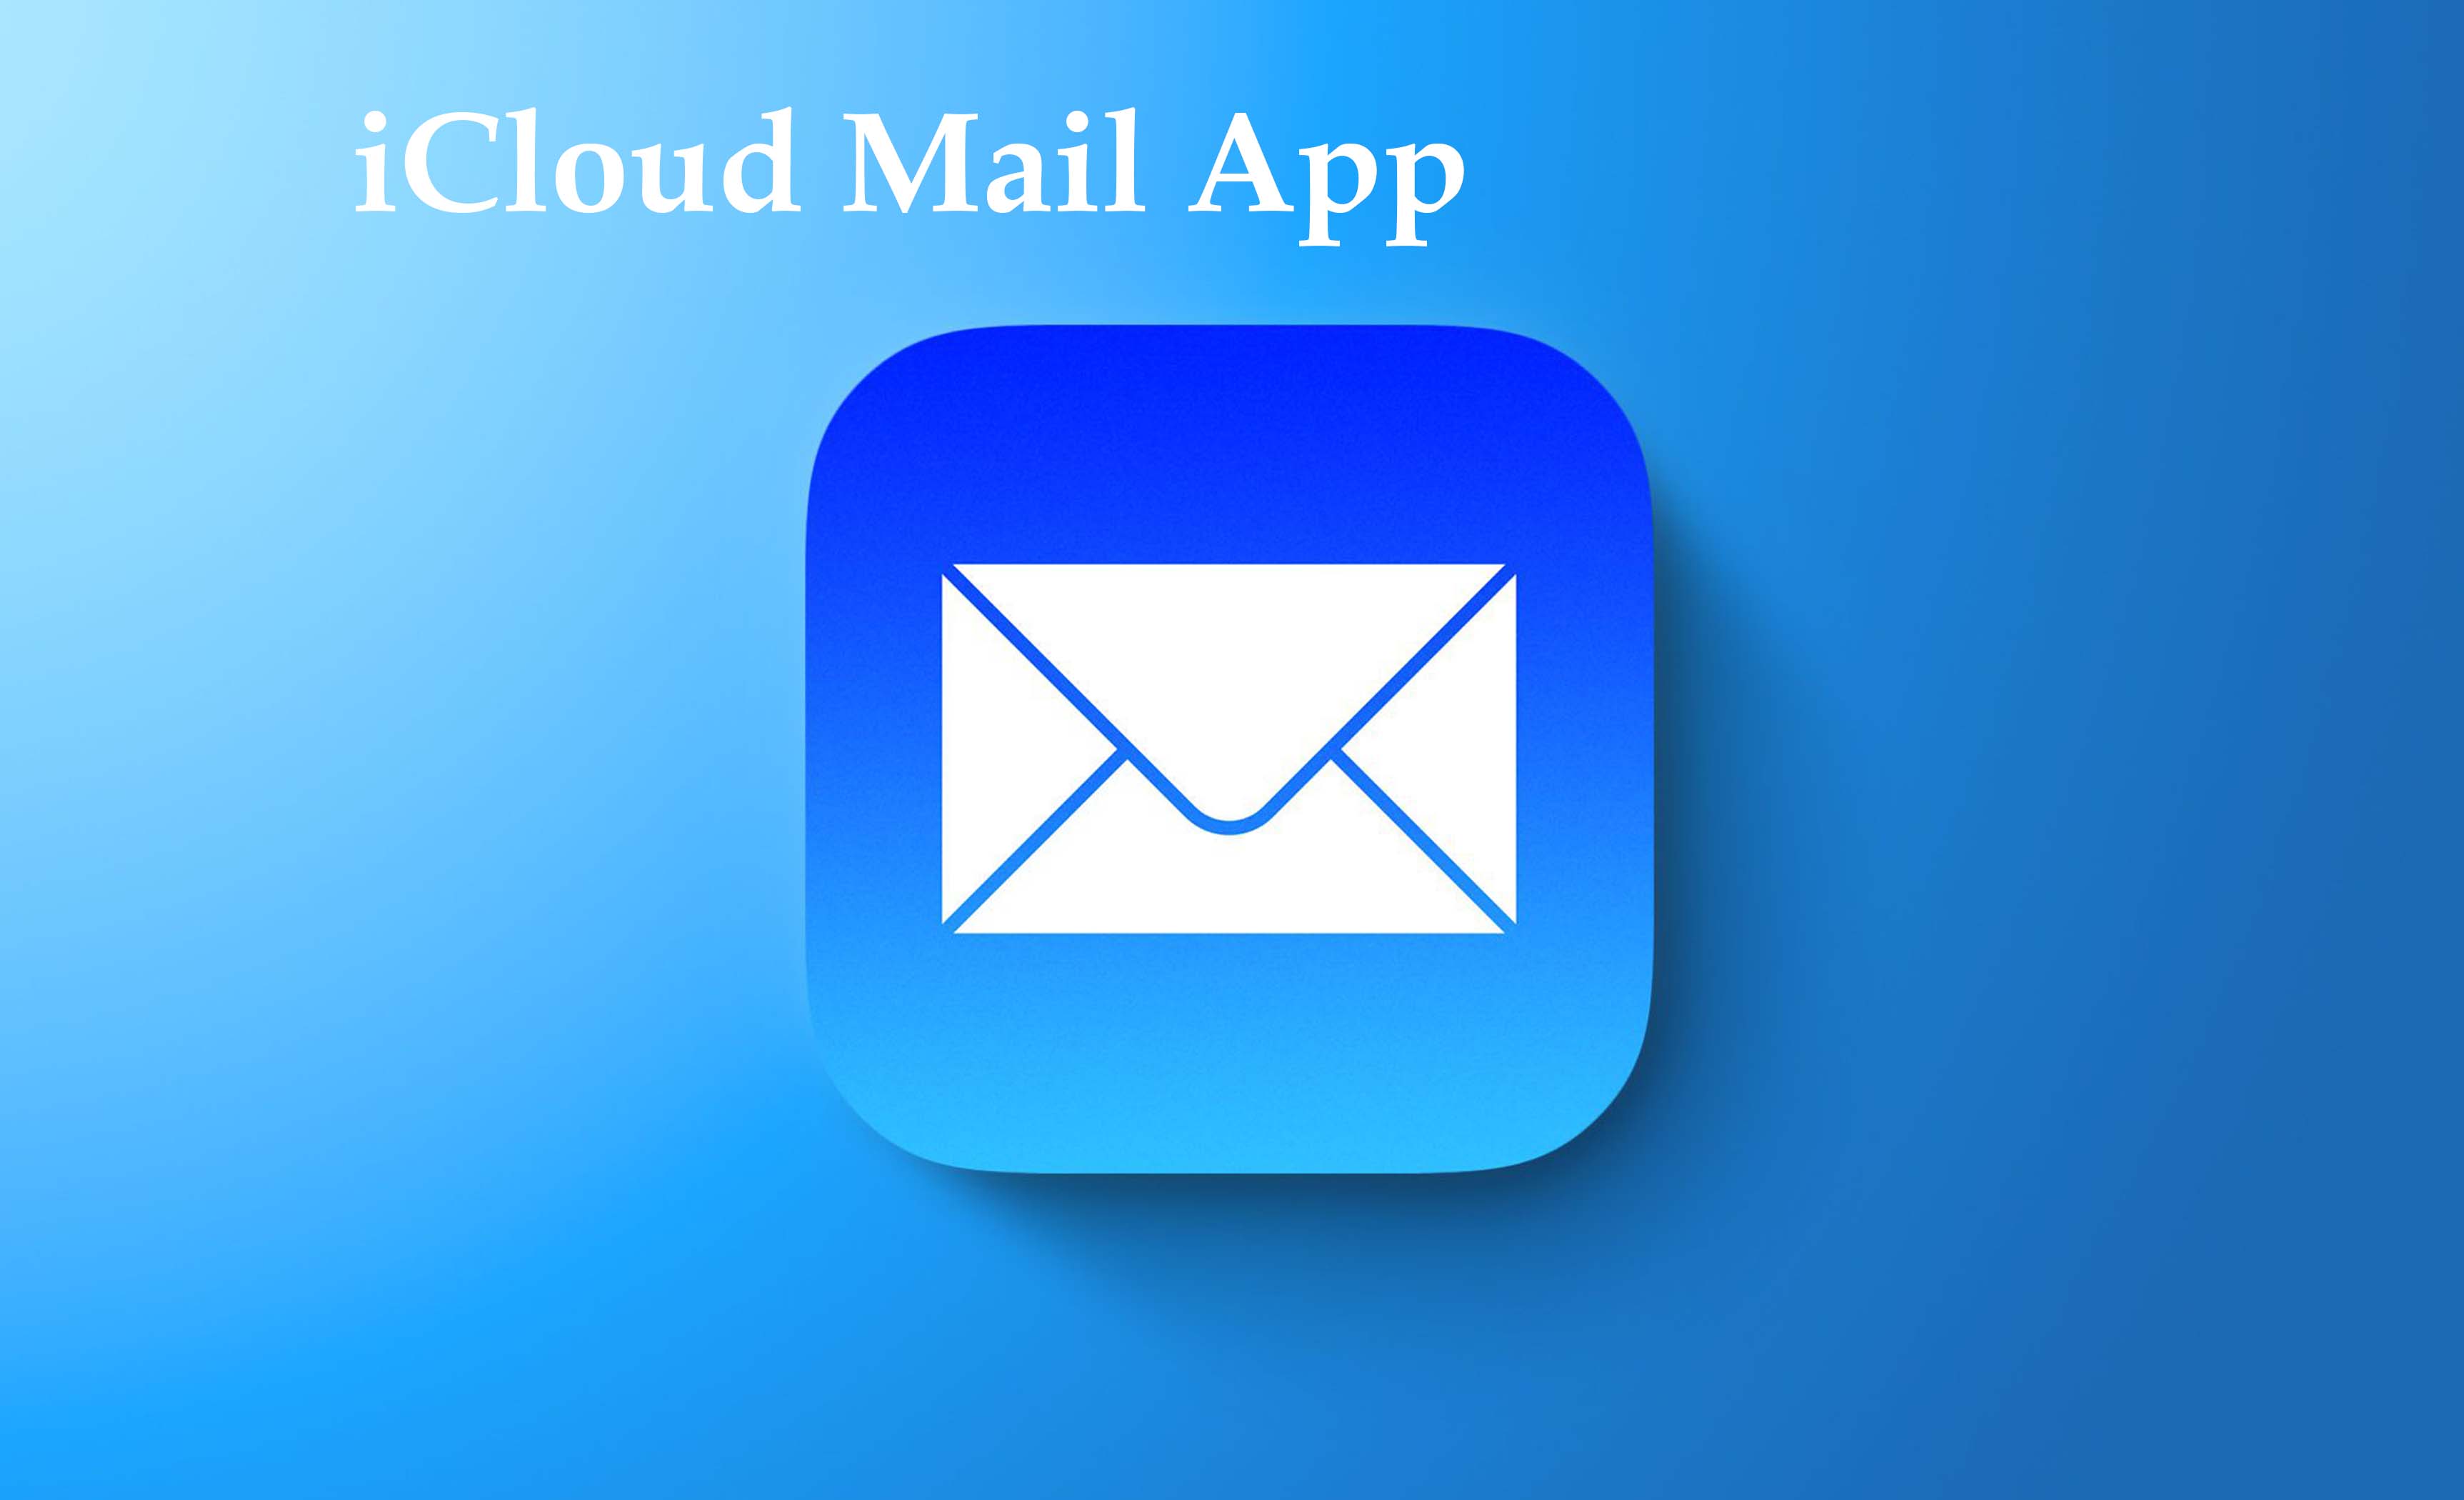 iCloud Mail App - Features of the Apple Mail App